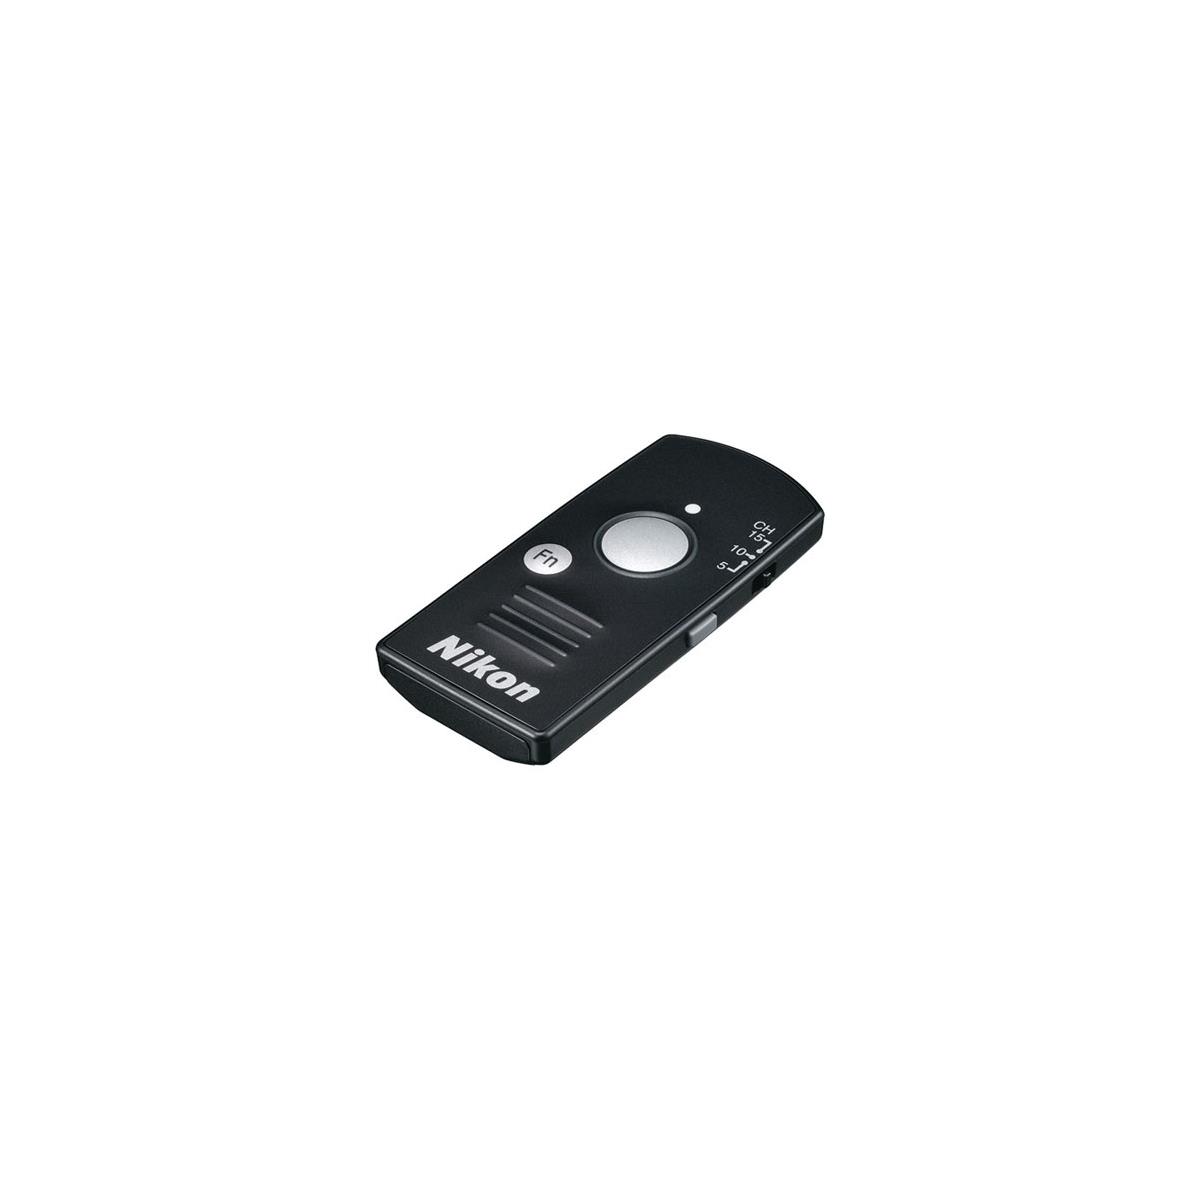 Image of Nikon WR-T10 Wireless Remote Controller Transmitter for Nikon Cameras